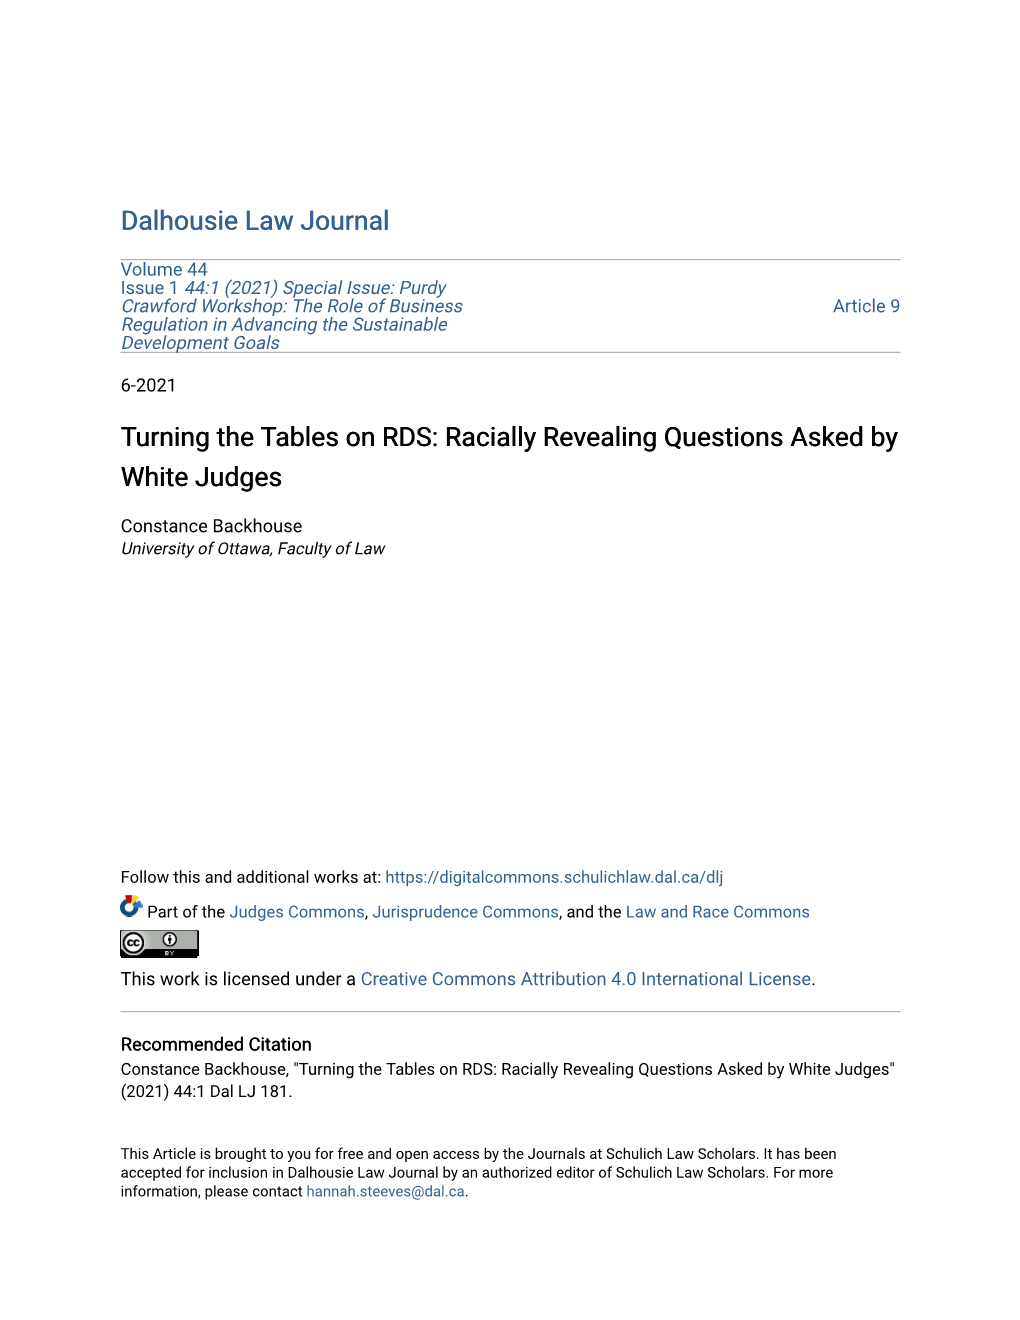 Racially Revealing Questions Asked by White Judges